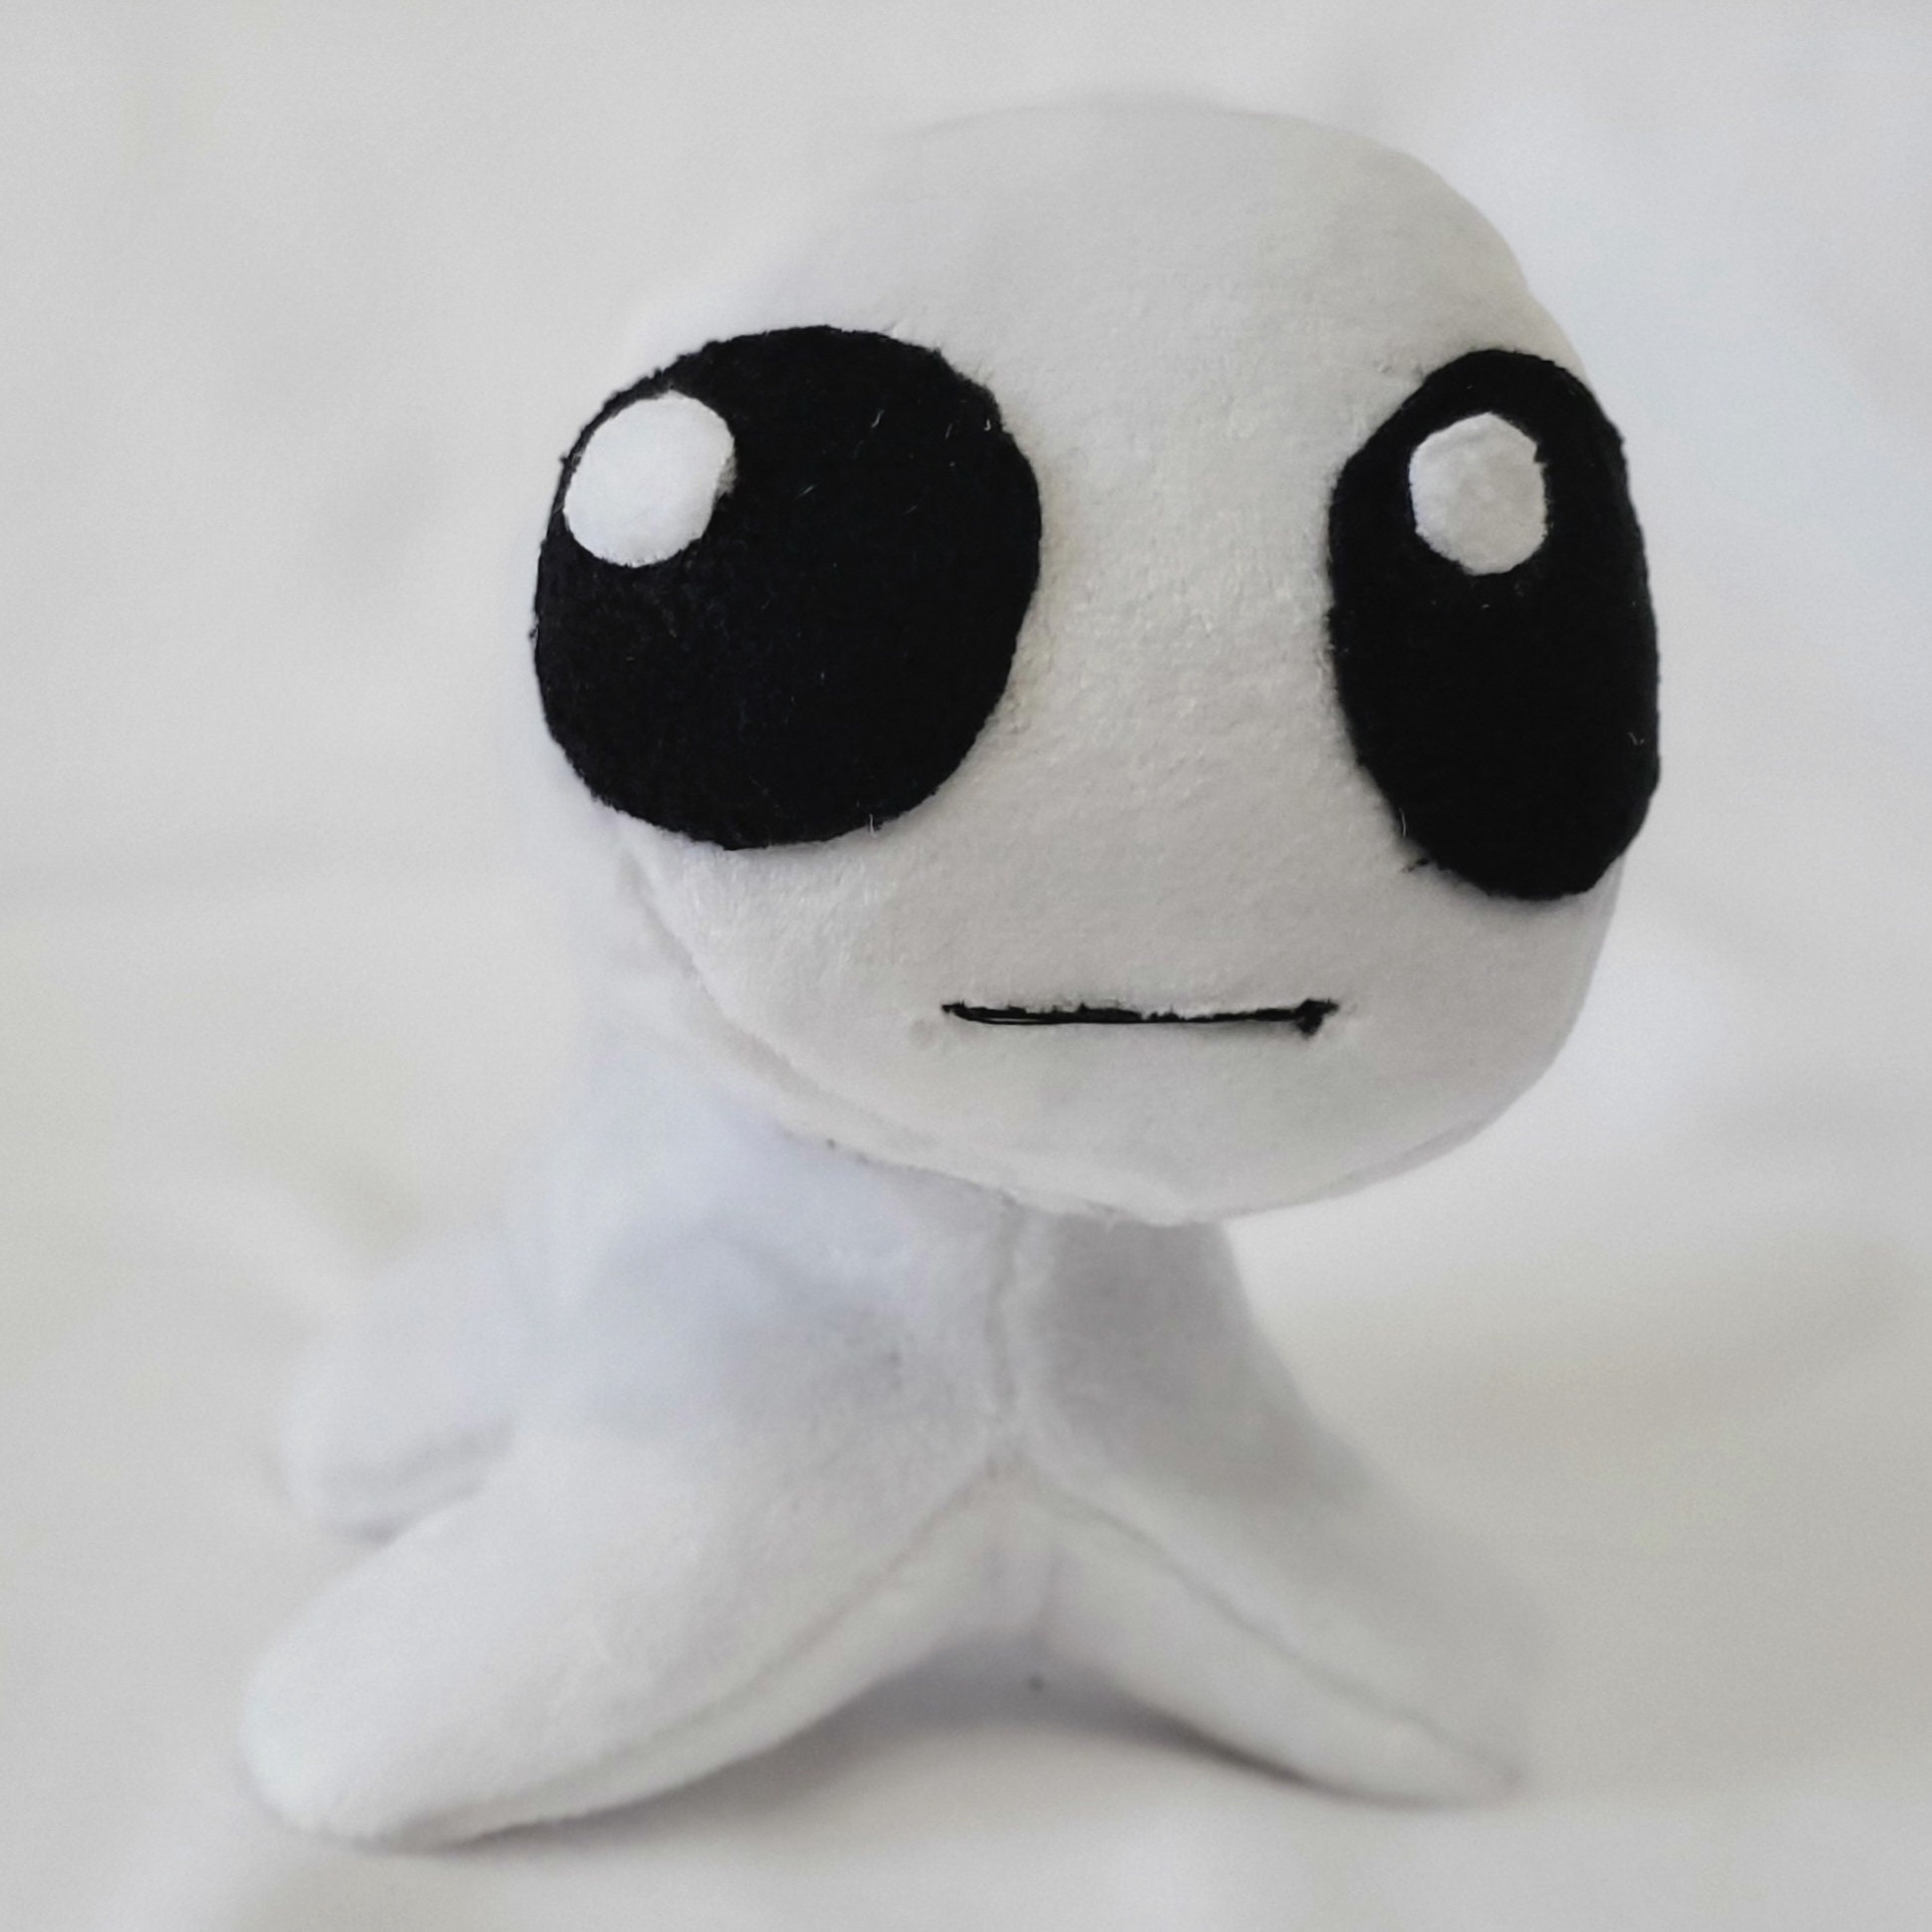 Jumbo TBH White YIPPEE Creature Plush [12 Inch] - DayLikesCookies's Ko-fi  Shop - Ko-fi ❤️ Where creators get support from fans through donations,  memberships, shop sales and more! The original 'Buy Me